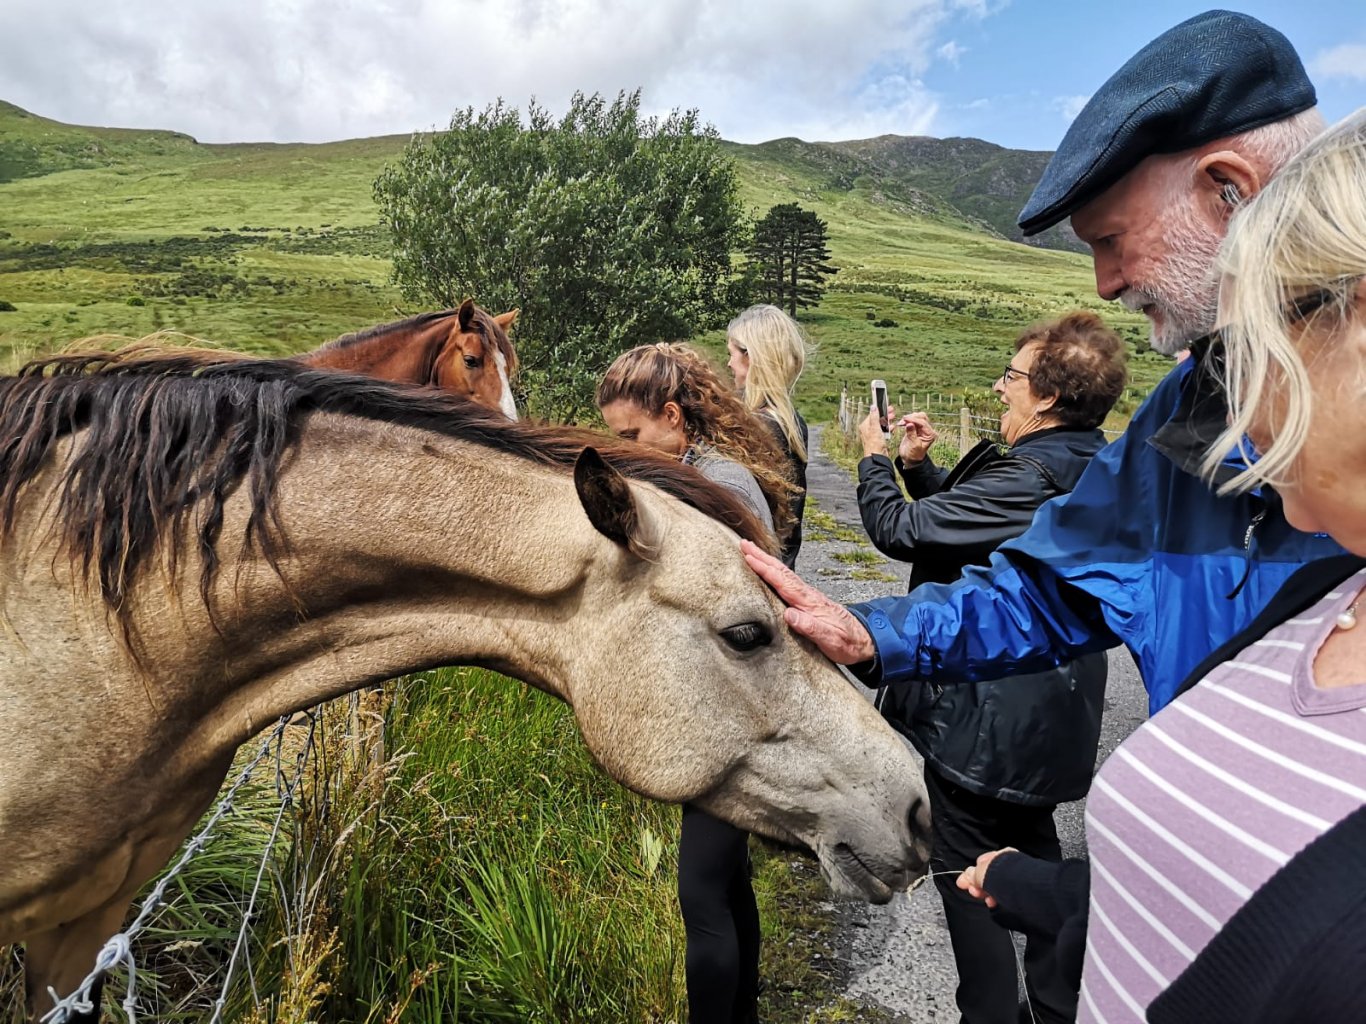 Tour guests feed and pet a Connemara pony in Ireland